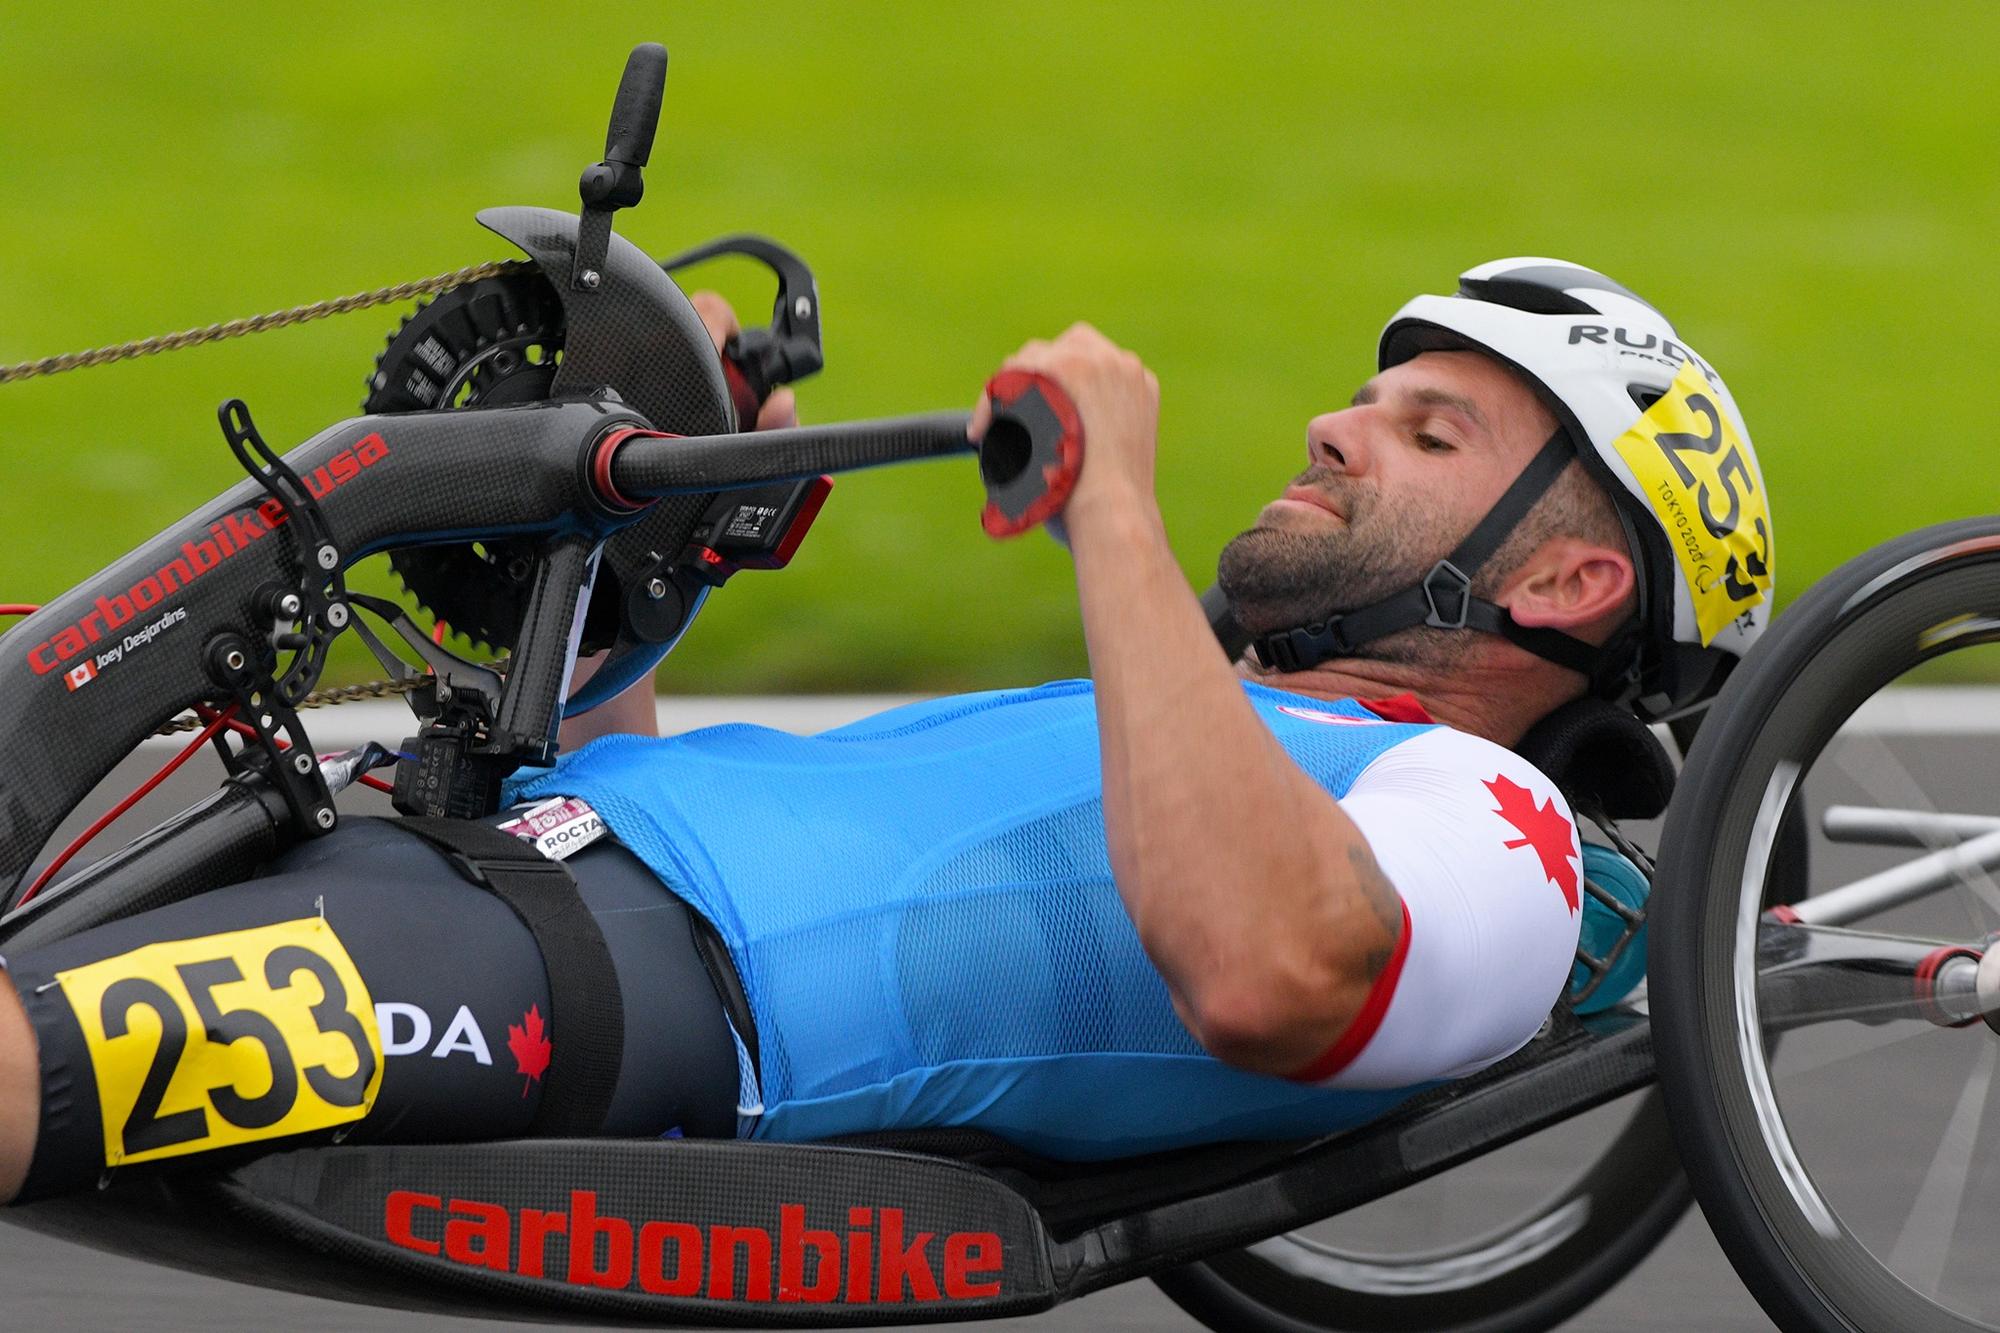 Joey Desjardins let it all out at Tokyo Paralympics